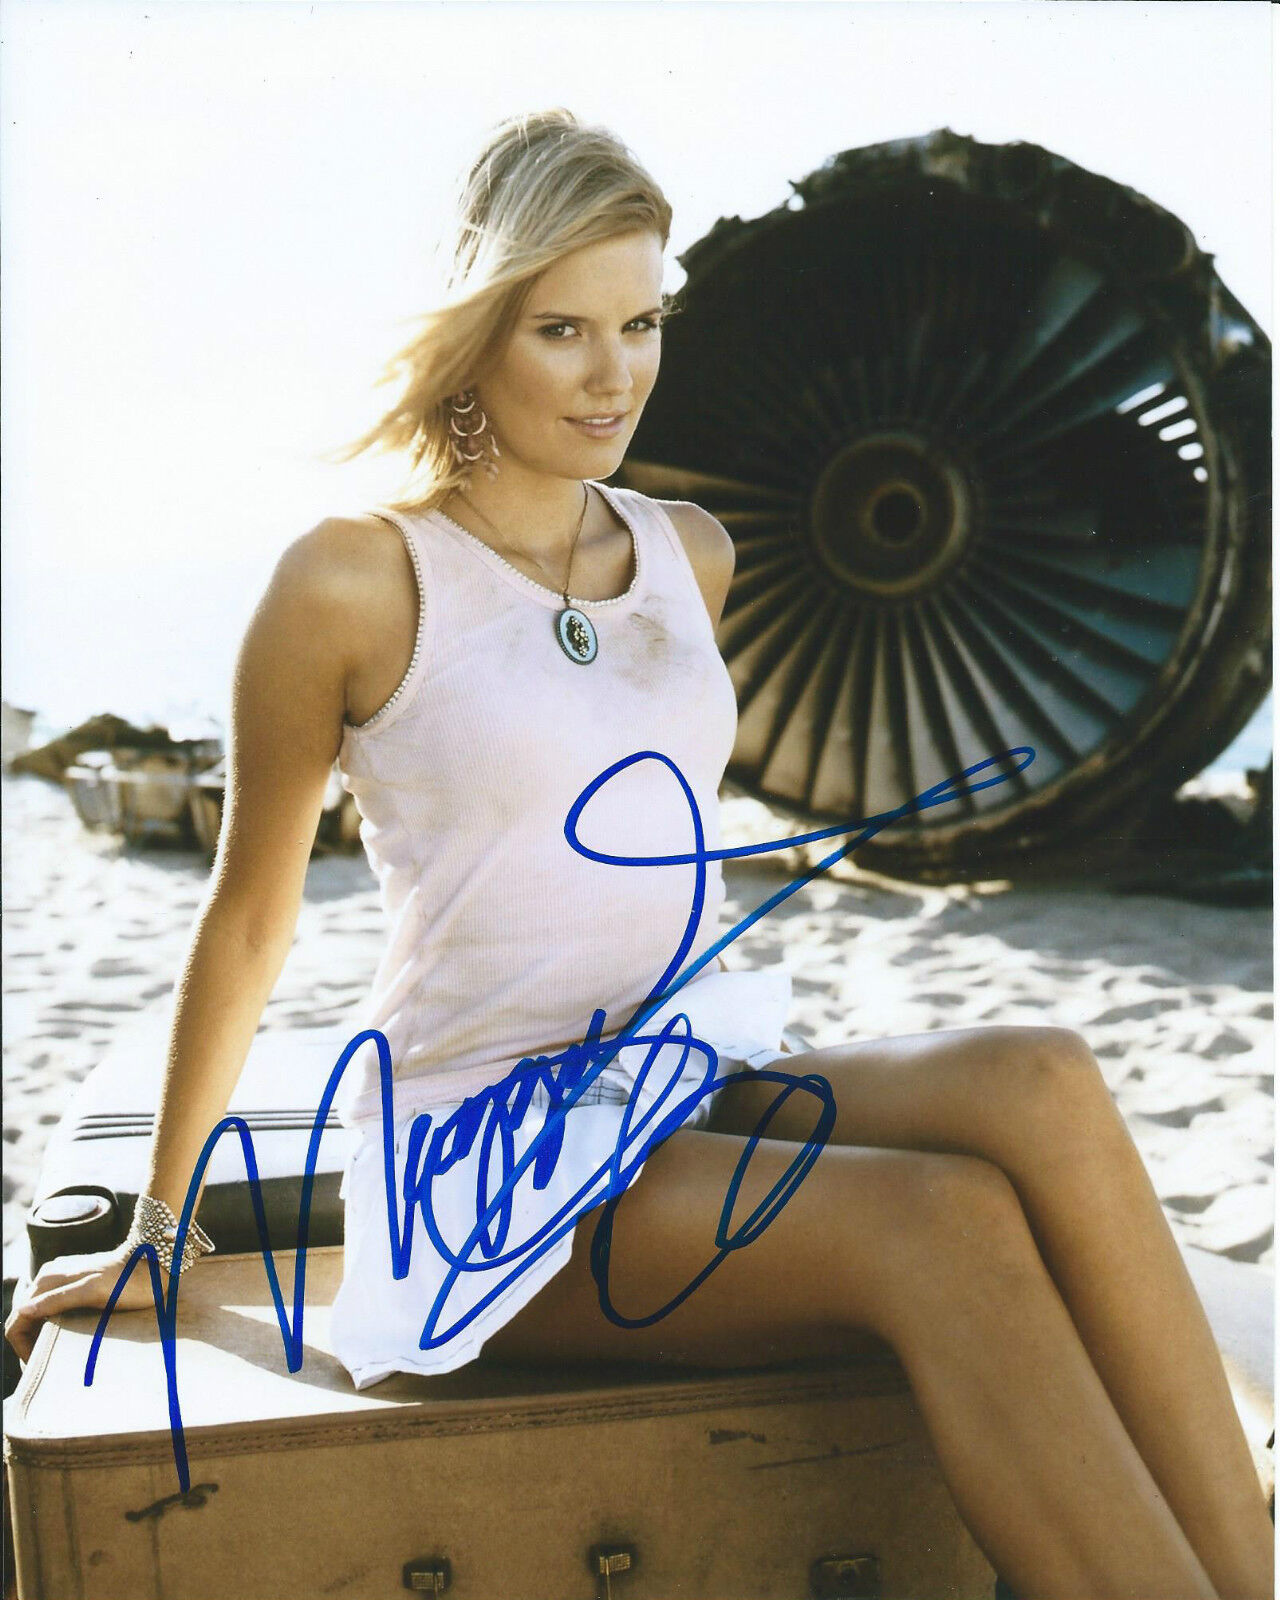 **GFA Taken-Lost Sexy Actress *MAGGIE GRACE* Signed 8x10 Photo Poster painting M2 COA**